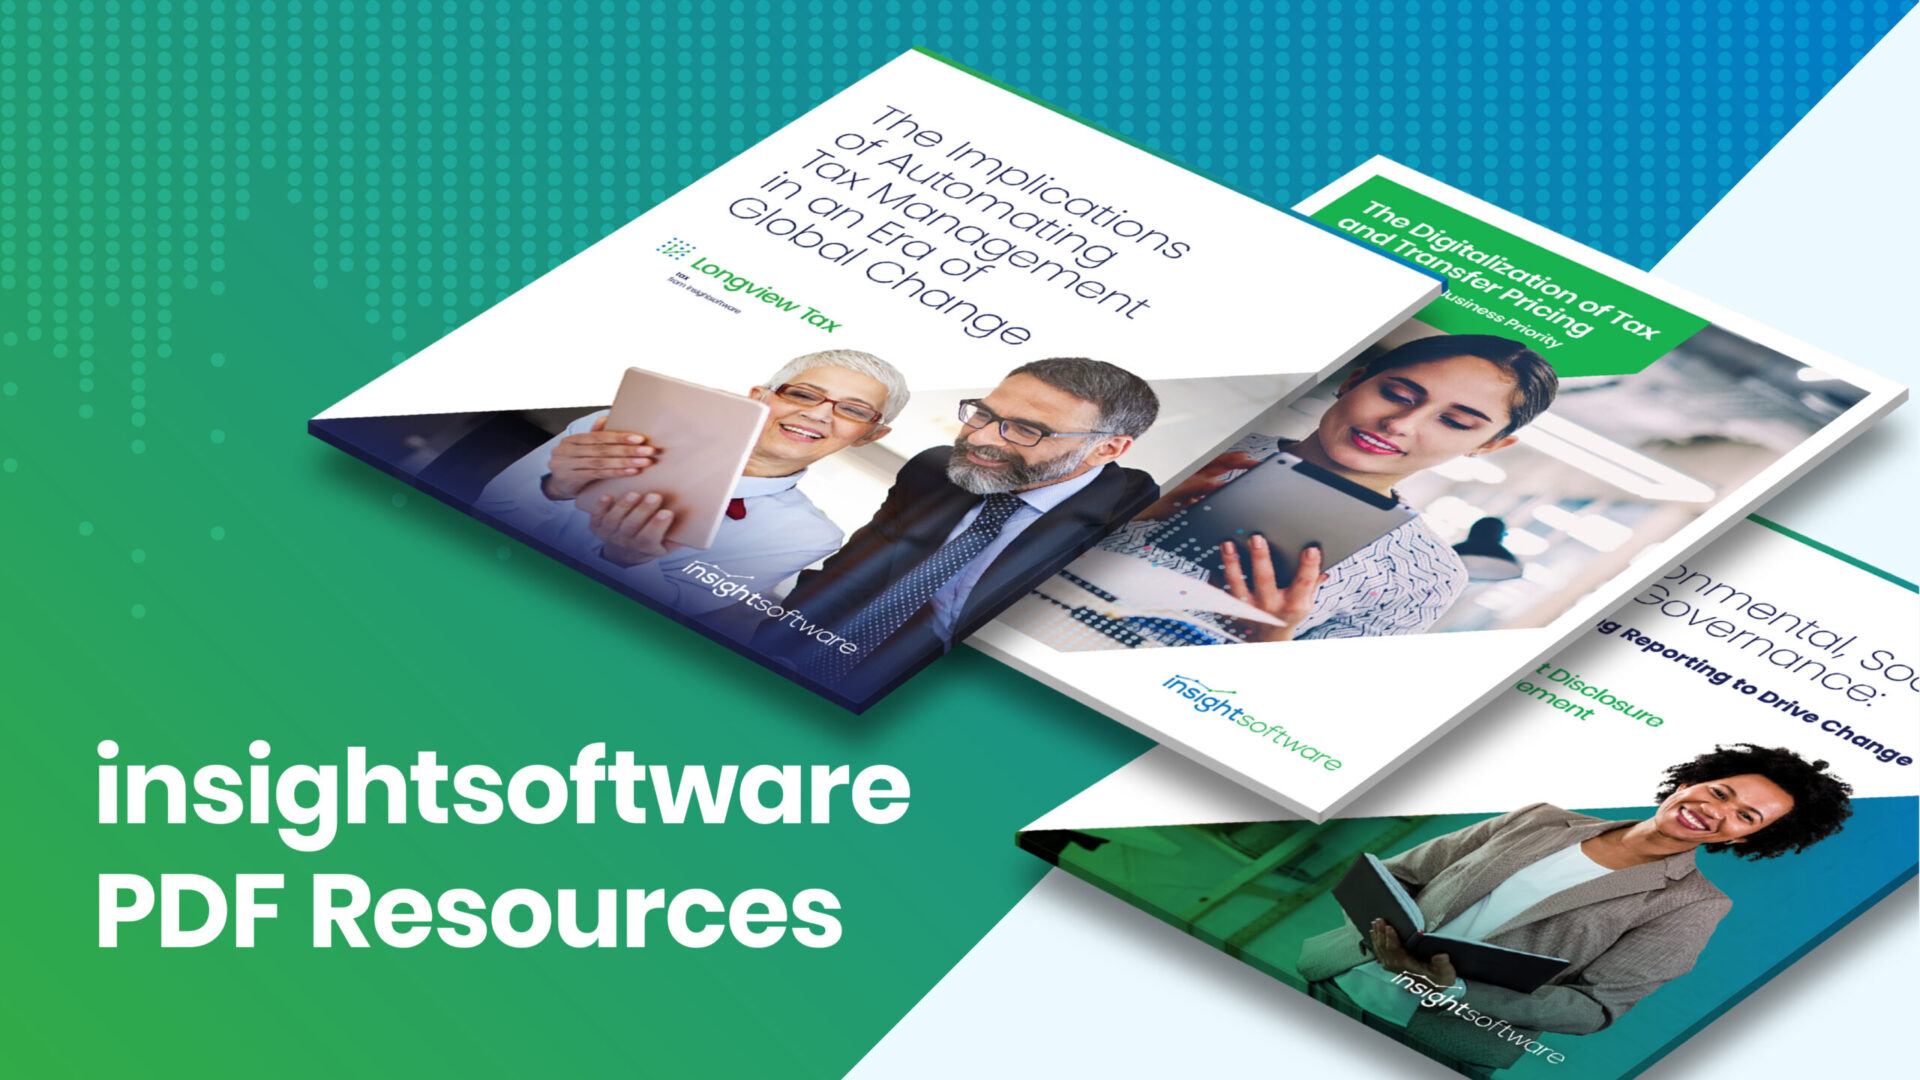 insightsoftware PDF Resources Grid Image